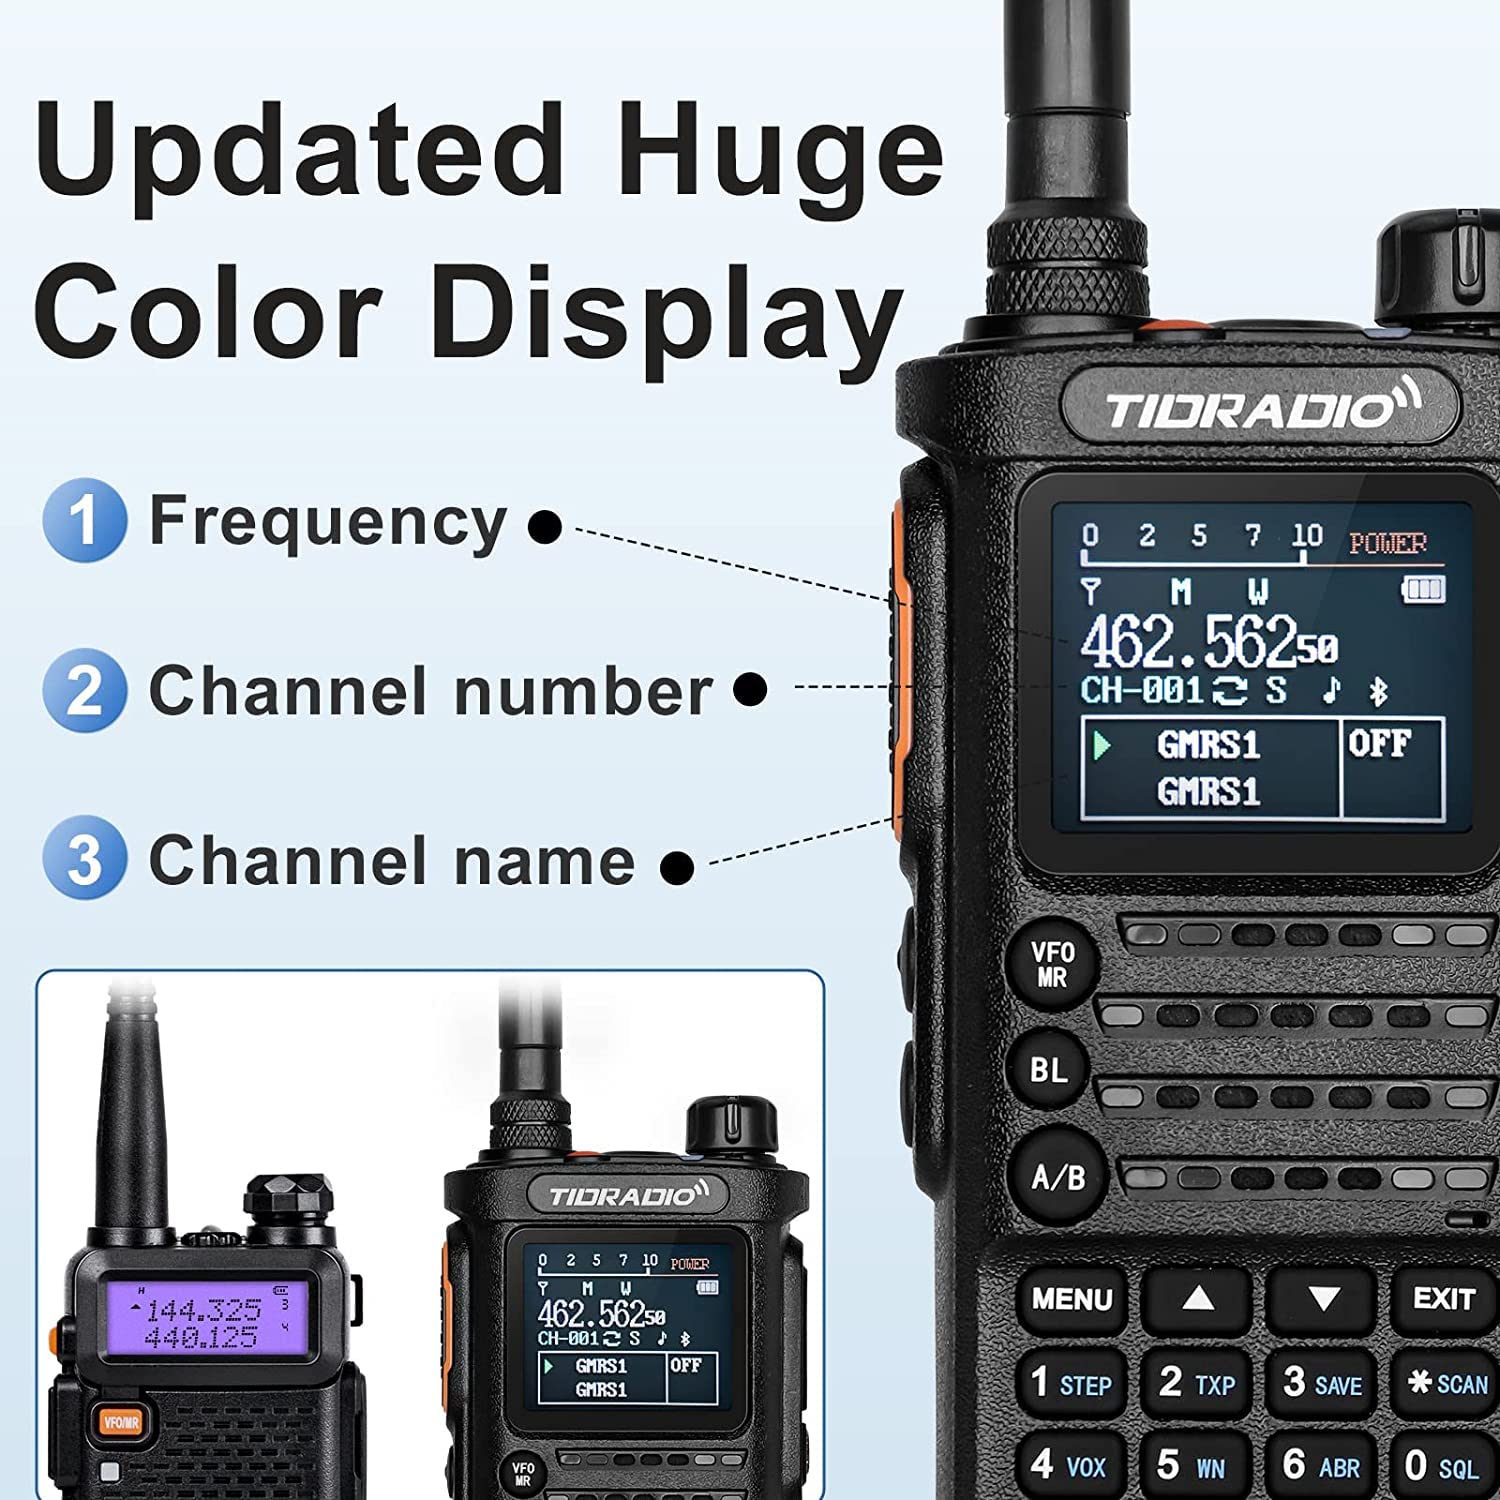 (2nd Gen)TIDRADIO TD-H8 GMRS Radio Handheld with Bluetooth Programming, GMRS Repeater Capable, NOAA, 5 Watt Long Range Two Way Radios Walkie Talkies with 771 GMRS Antenna, 2500mAh Rechargeable Battery